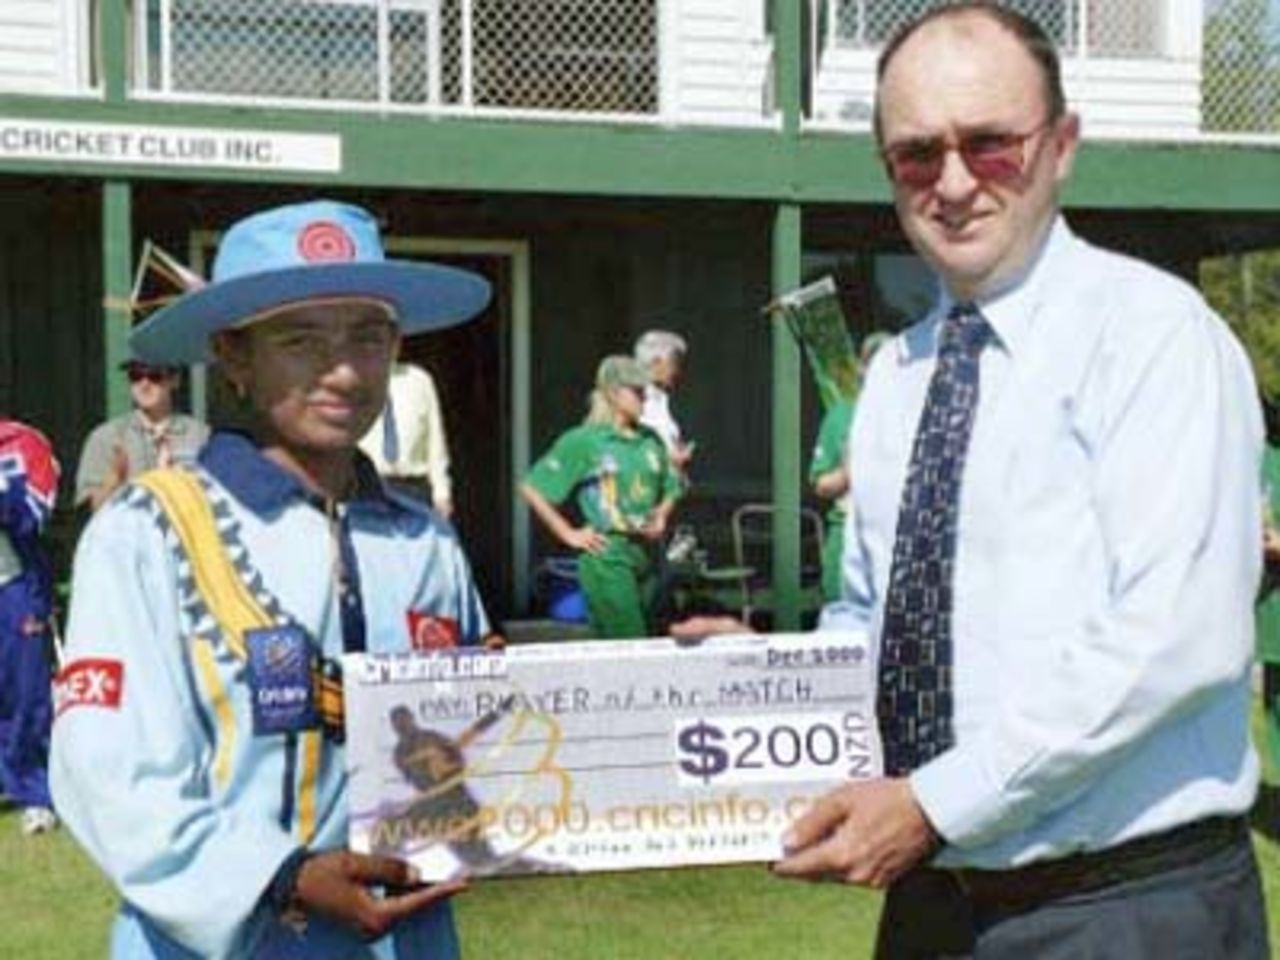 Mithali Raj receives the Player of the match award for the Ind-SA match, CricInfo Women's World Cup, 2000/01, 3rd Match, India Women v South Africa Women, Hagley Oval, Christchurch, 30 November 2000.